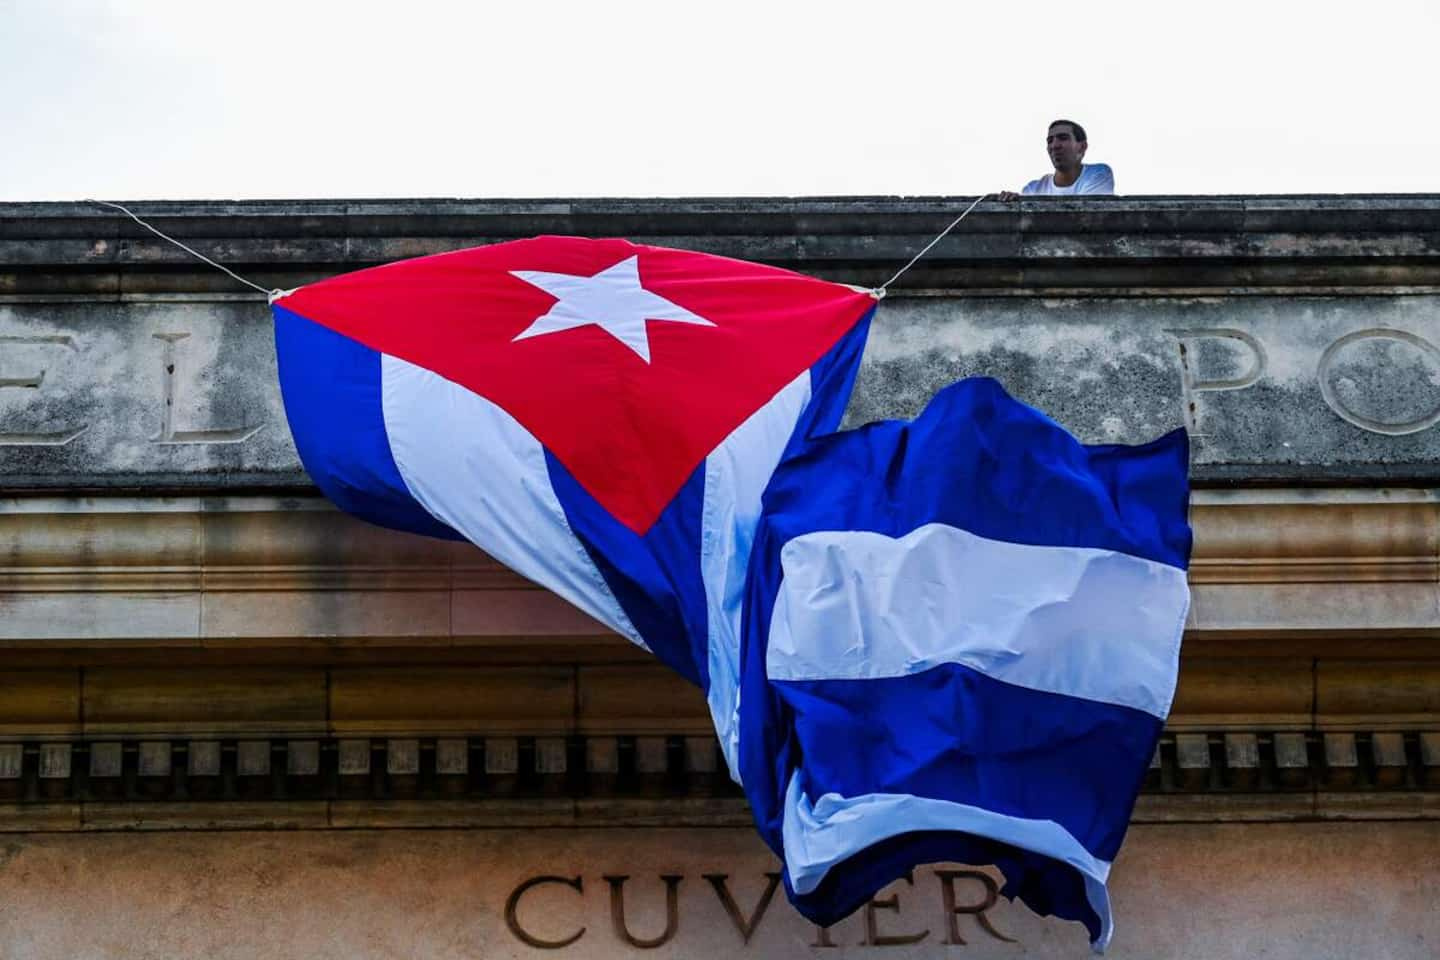 Sentenced to pay a $450 million fine for having stopped over in Cuba